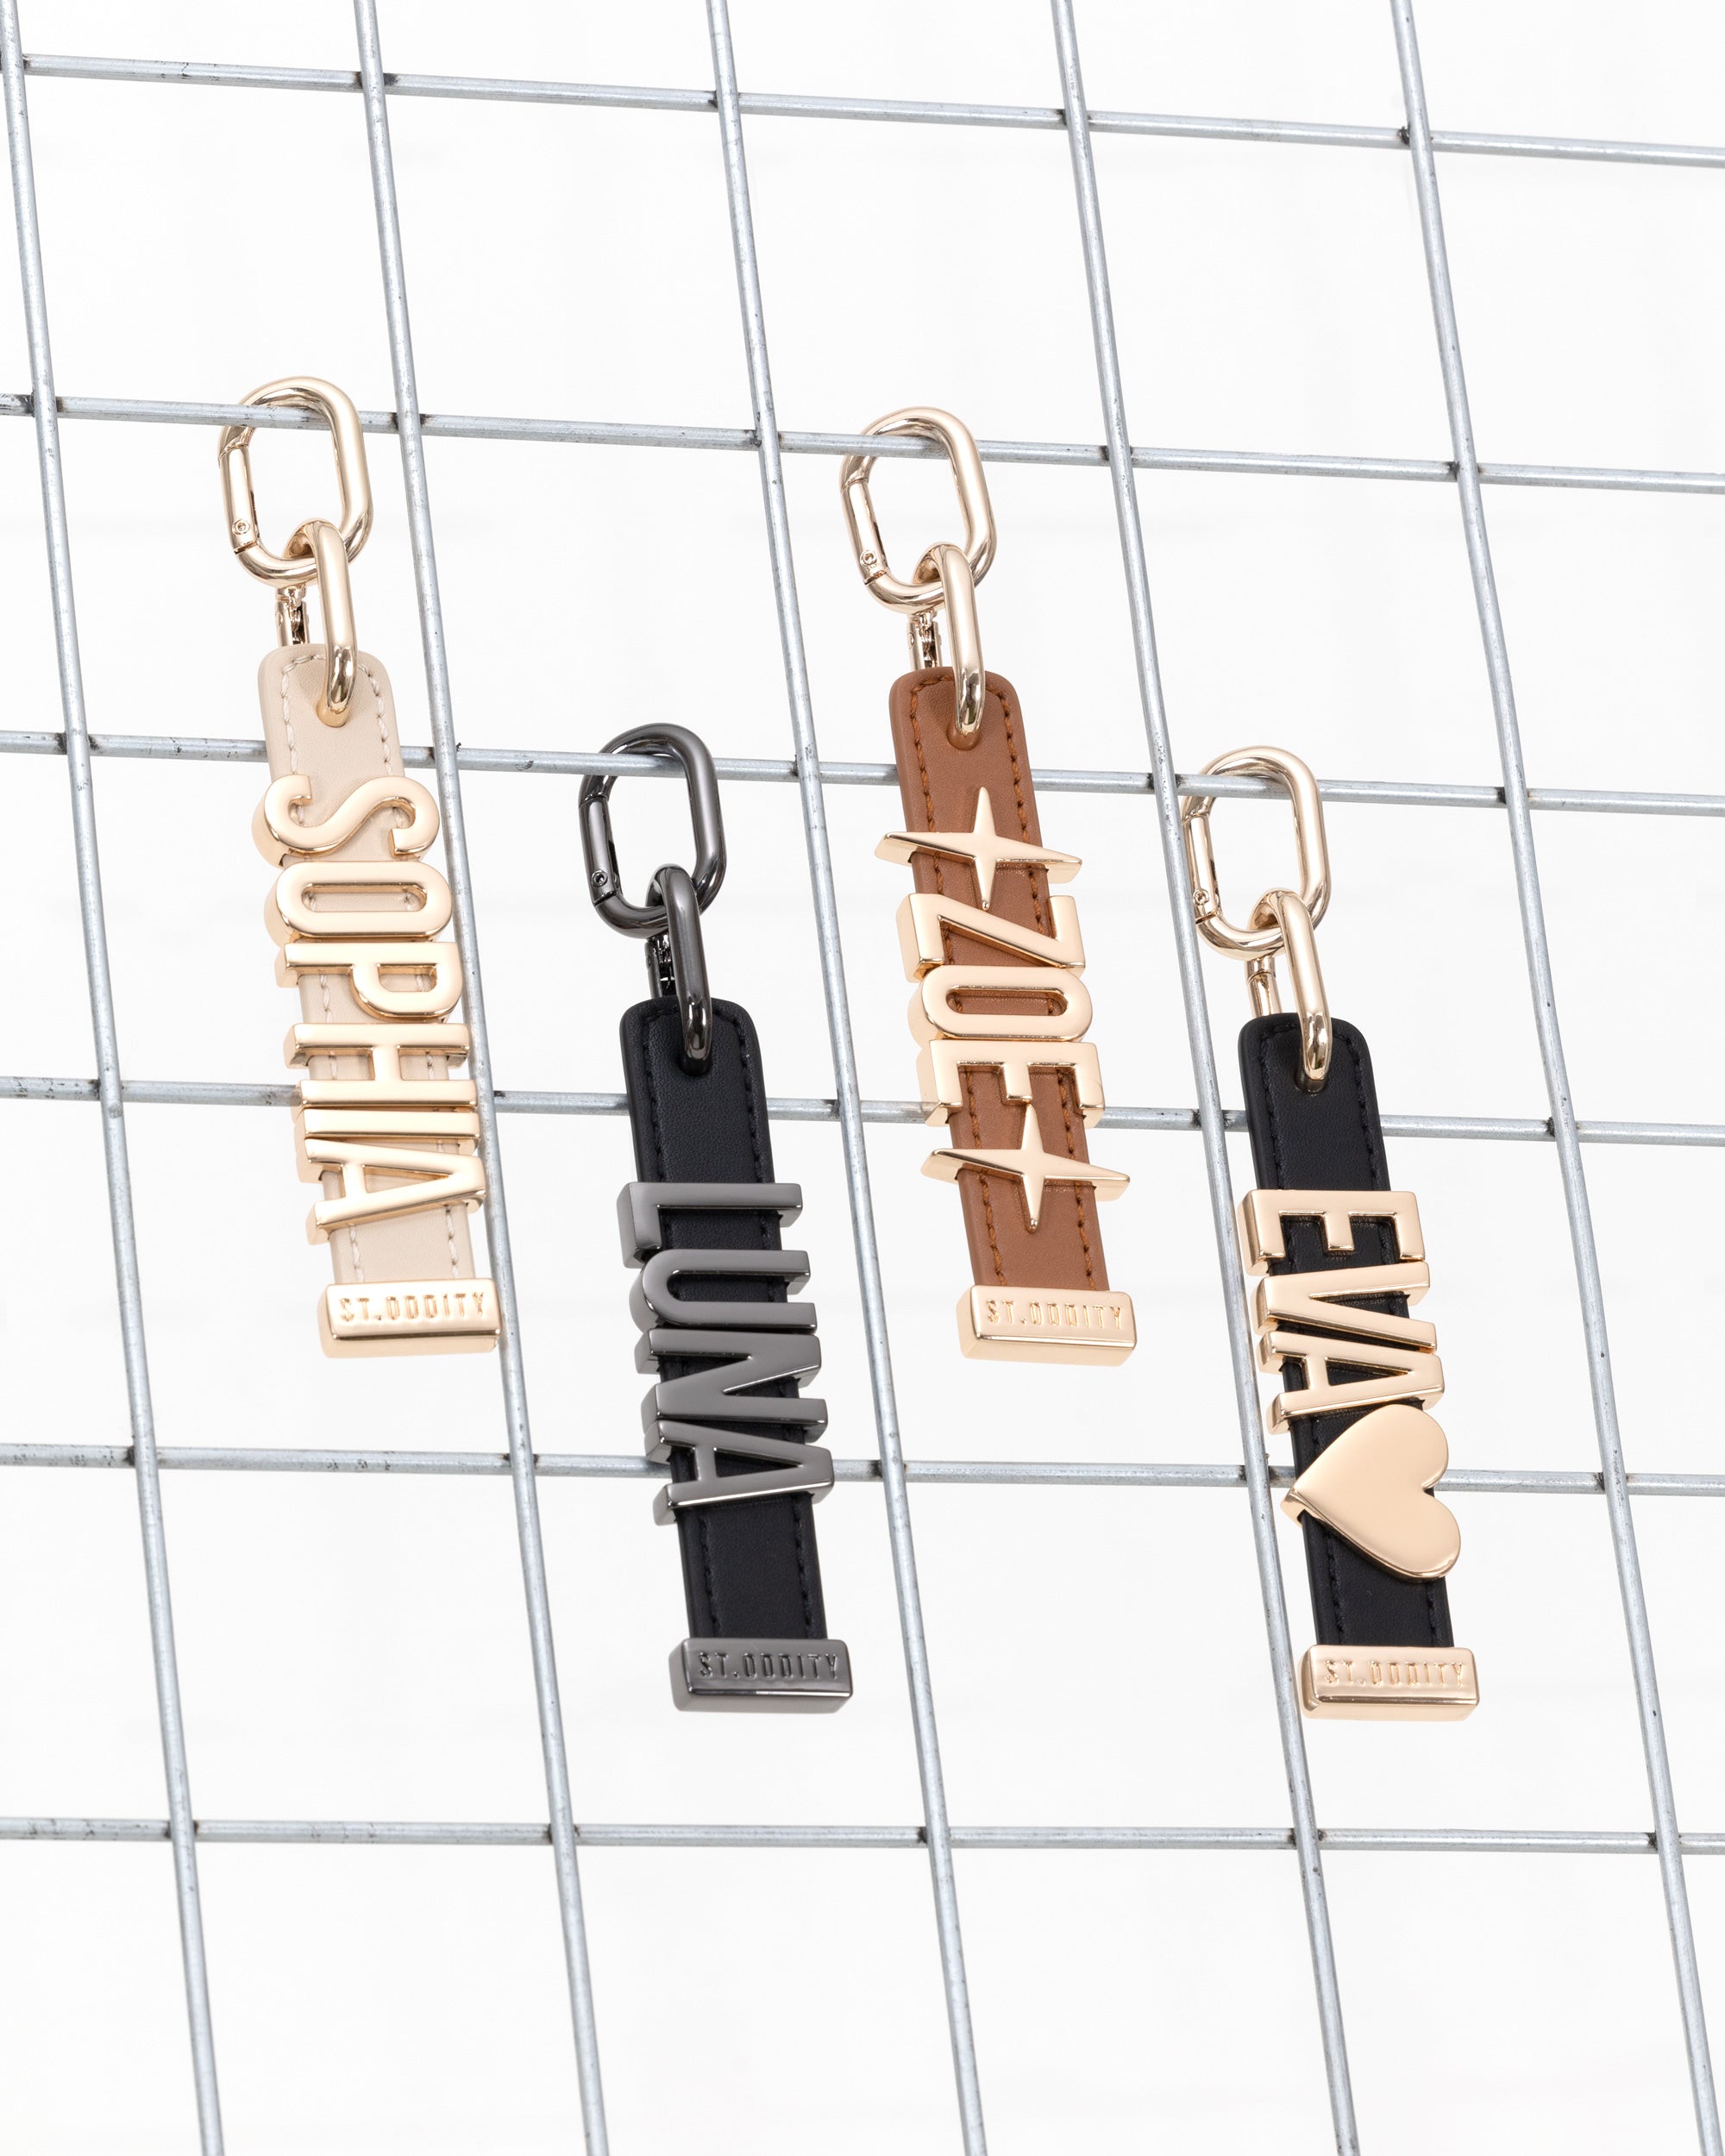 Pre-order (Mid-May): Charm in Tan with Personalised Hardware